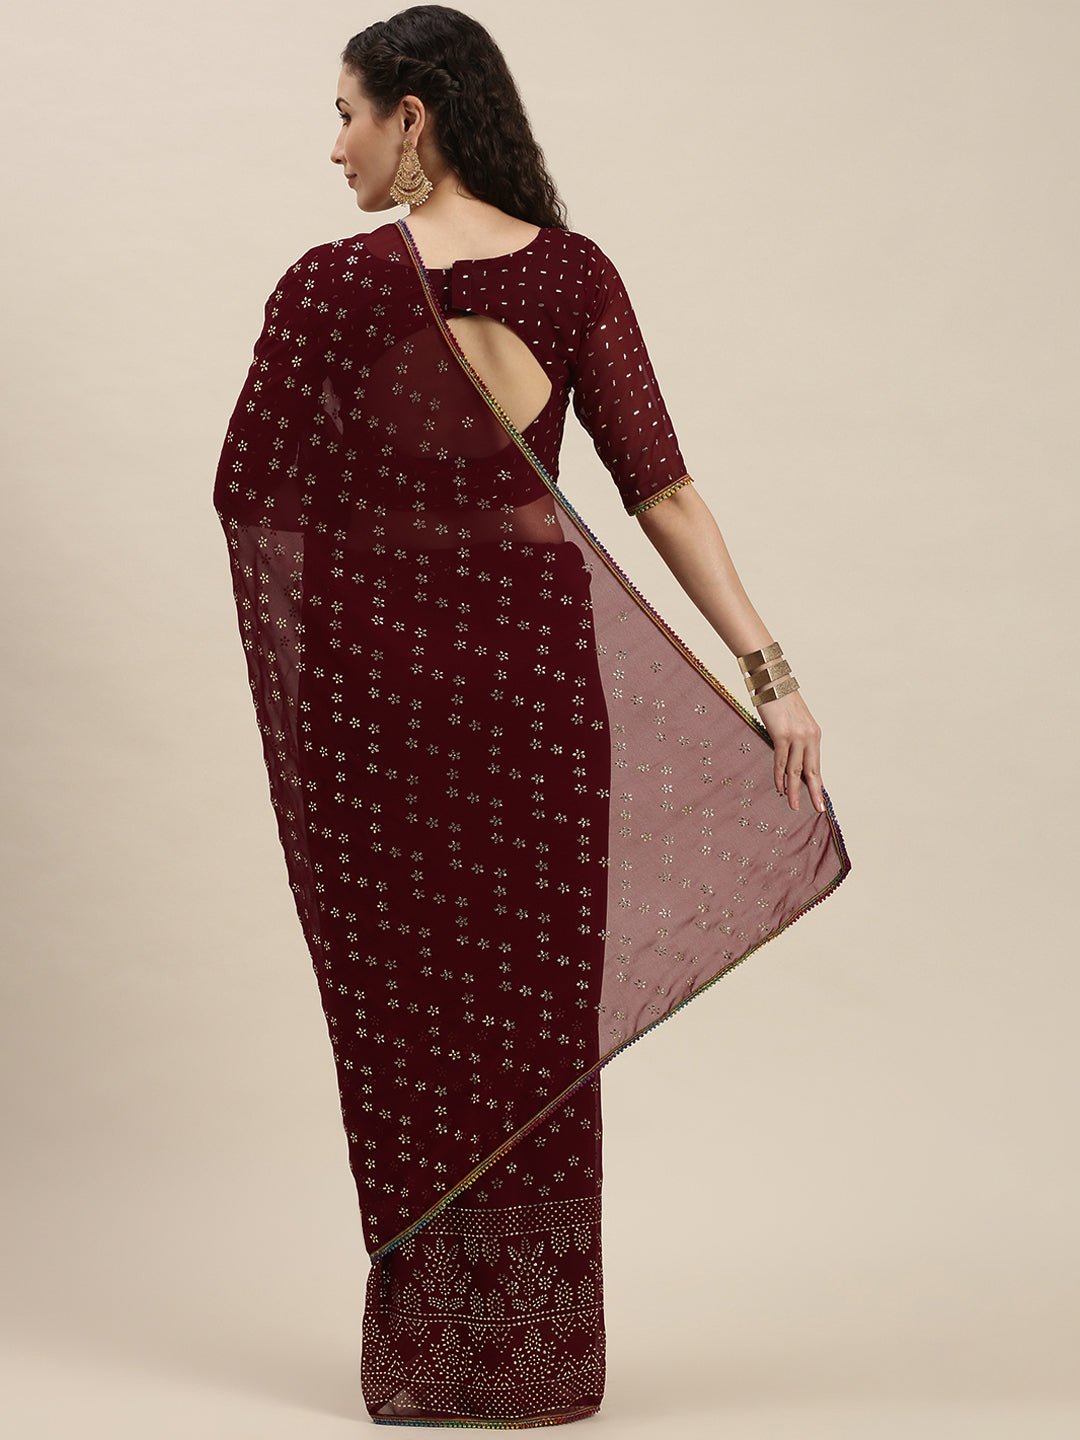 Maroon Color Silver-Toned Embroidered Saree